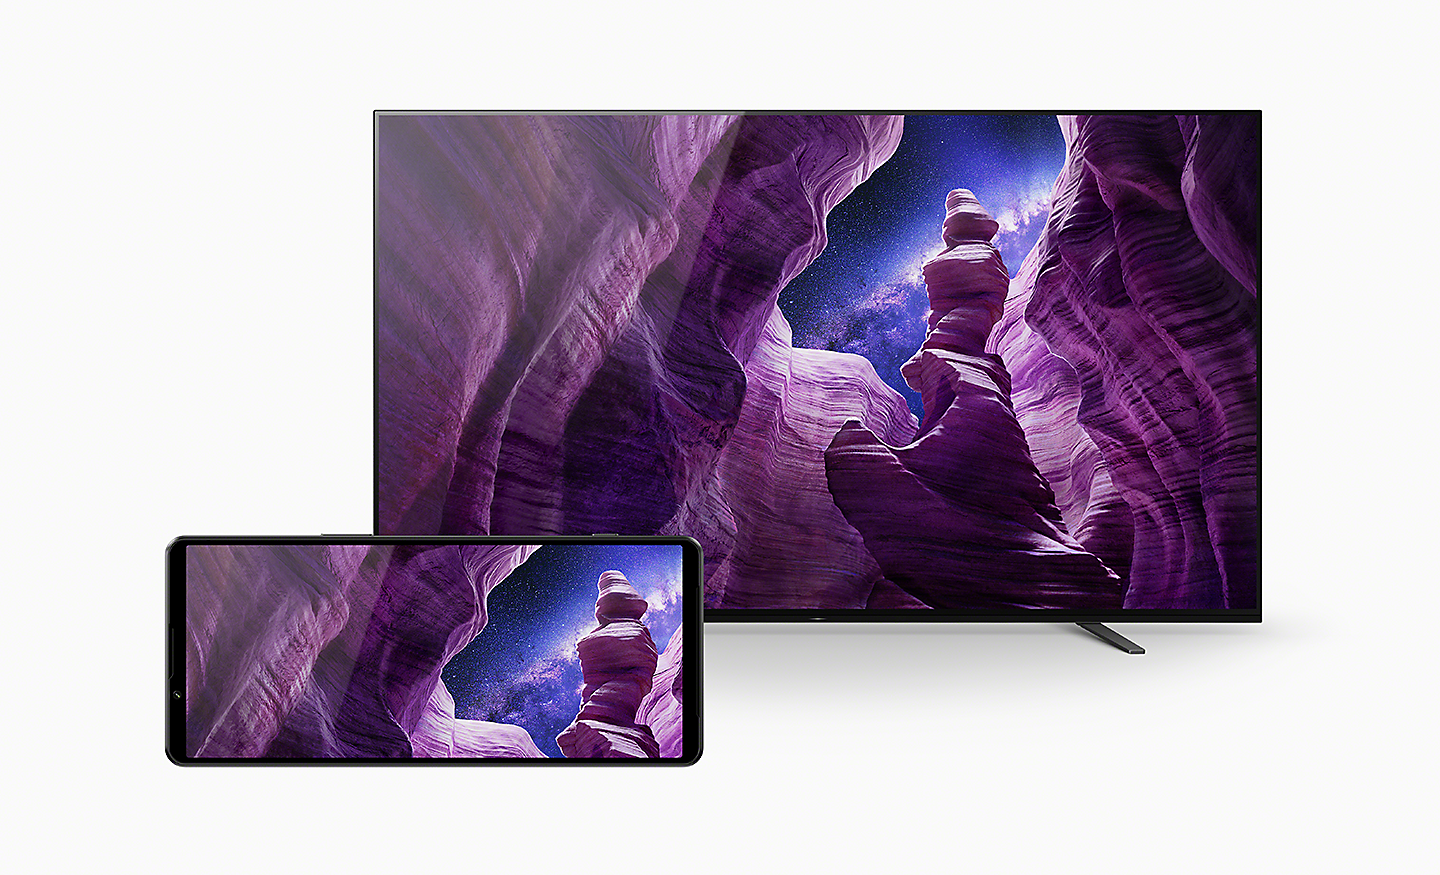 Xperia 1 IV in front of a Sony BRAVIA TV, both displaying an image of a dramatic rock formation